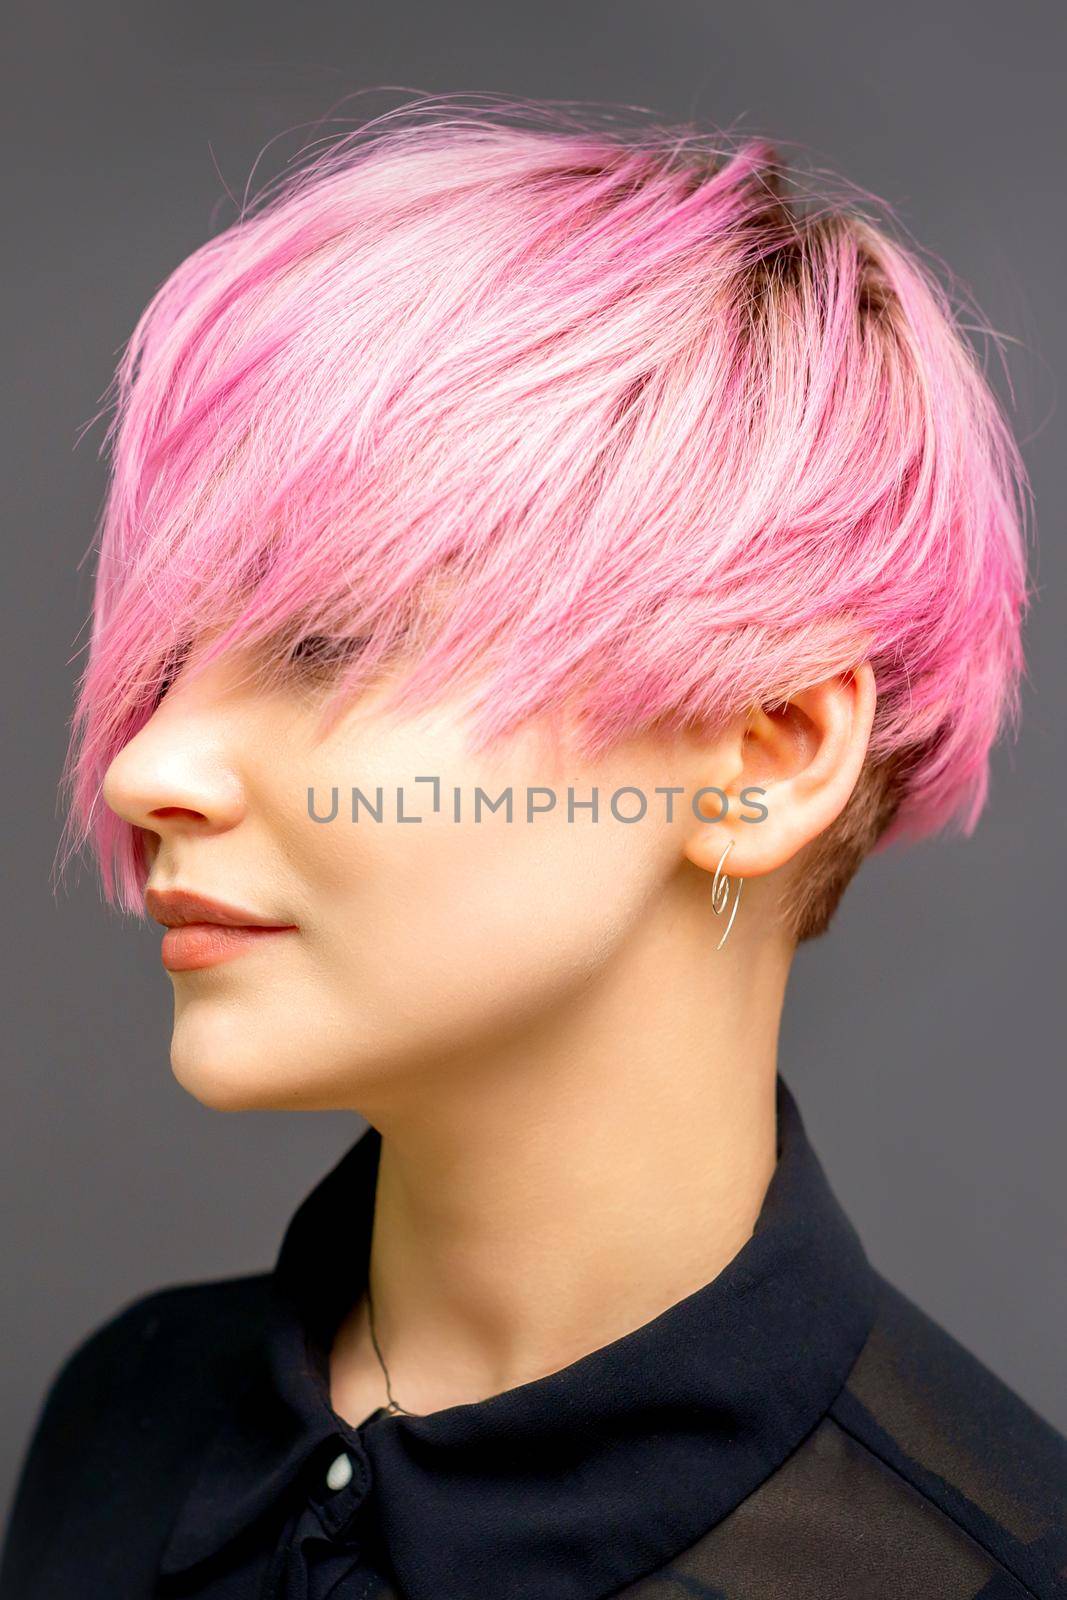 Profile of a beautiful young caucasian woman with short straight bob hairstyle dyed in pink color with closed eyes with copy space